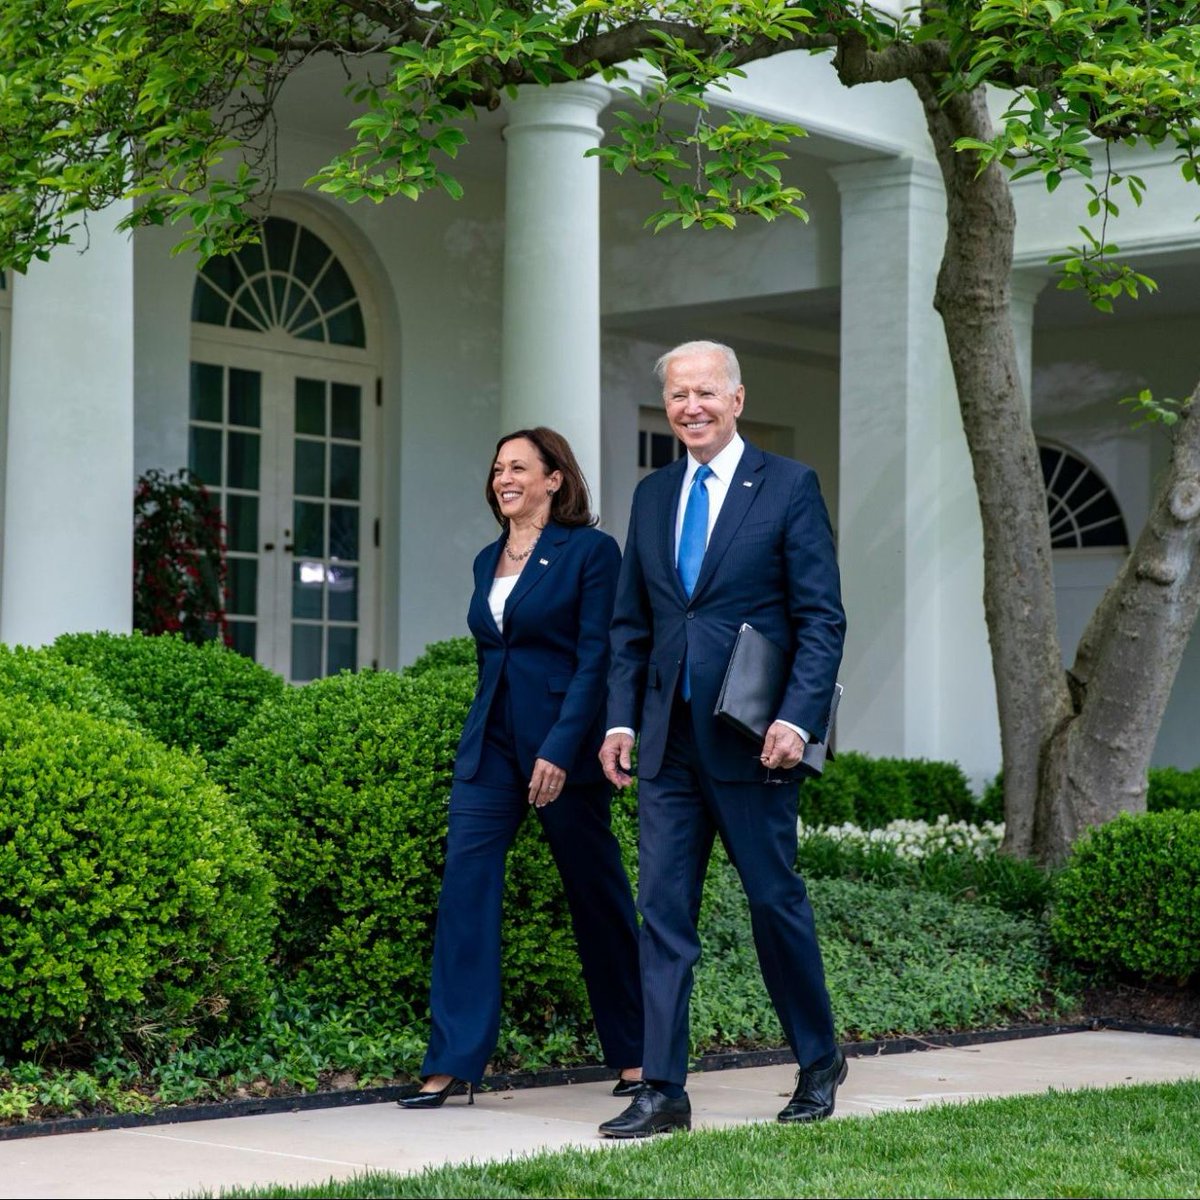 Over the past three years, President Biden and I have: Created more than 14 million new jobs. Increased wages for tens of millions of Americans. Lowered costs for families. We have more work to do, but it's clear: America's economy is strong and getting stronger.